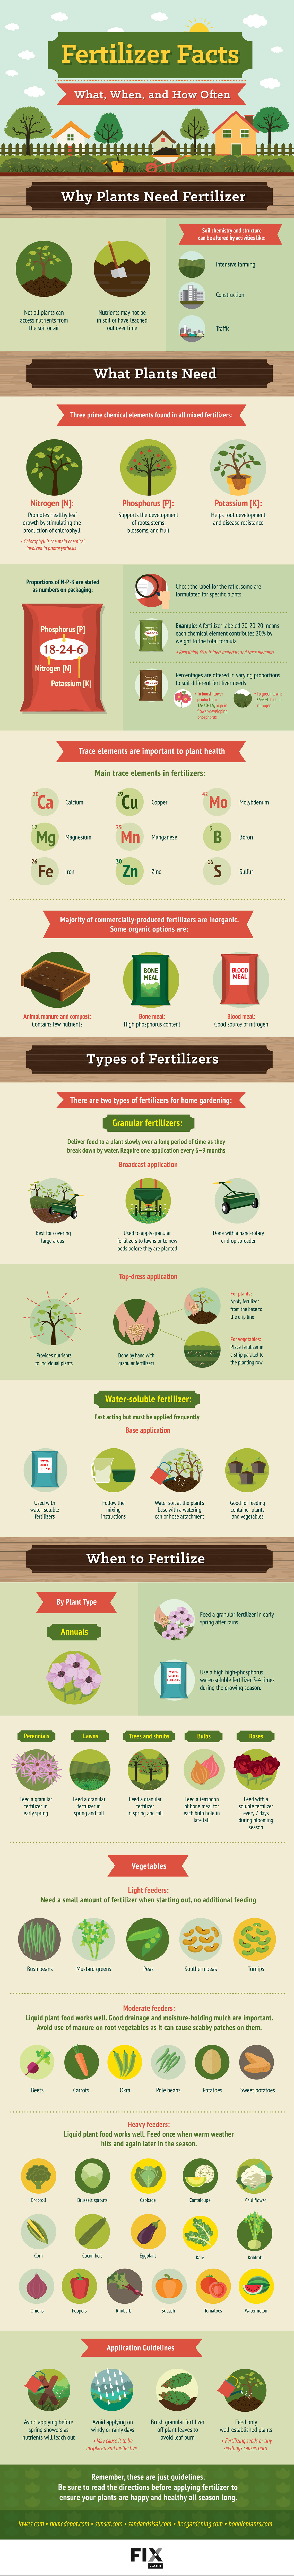 Fertilizer Facts: What, When and How Often [Infographic] | ecogreenlove